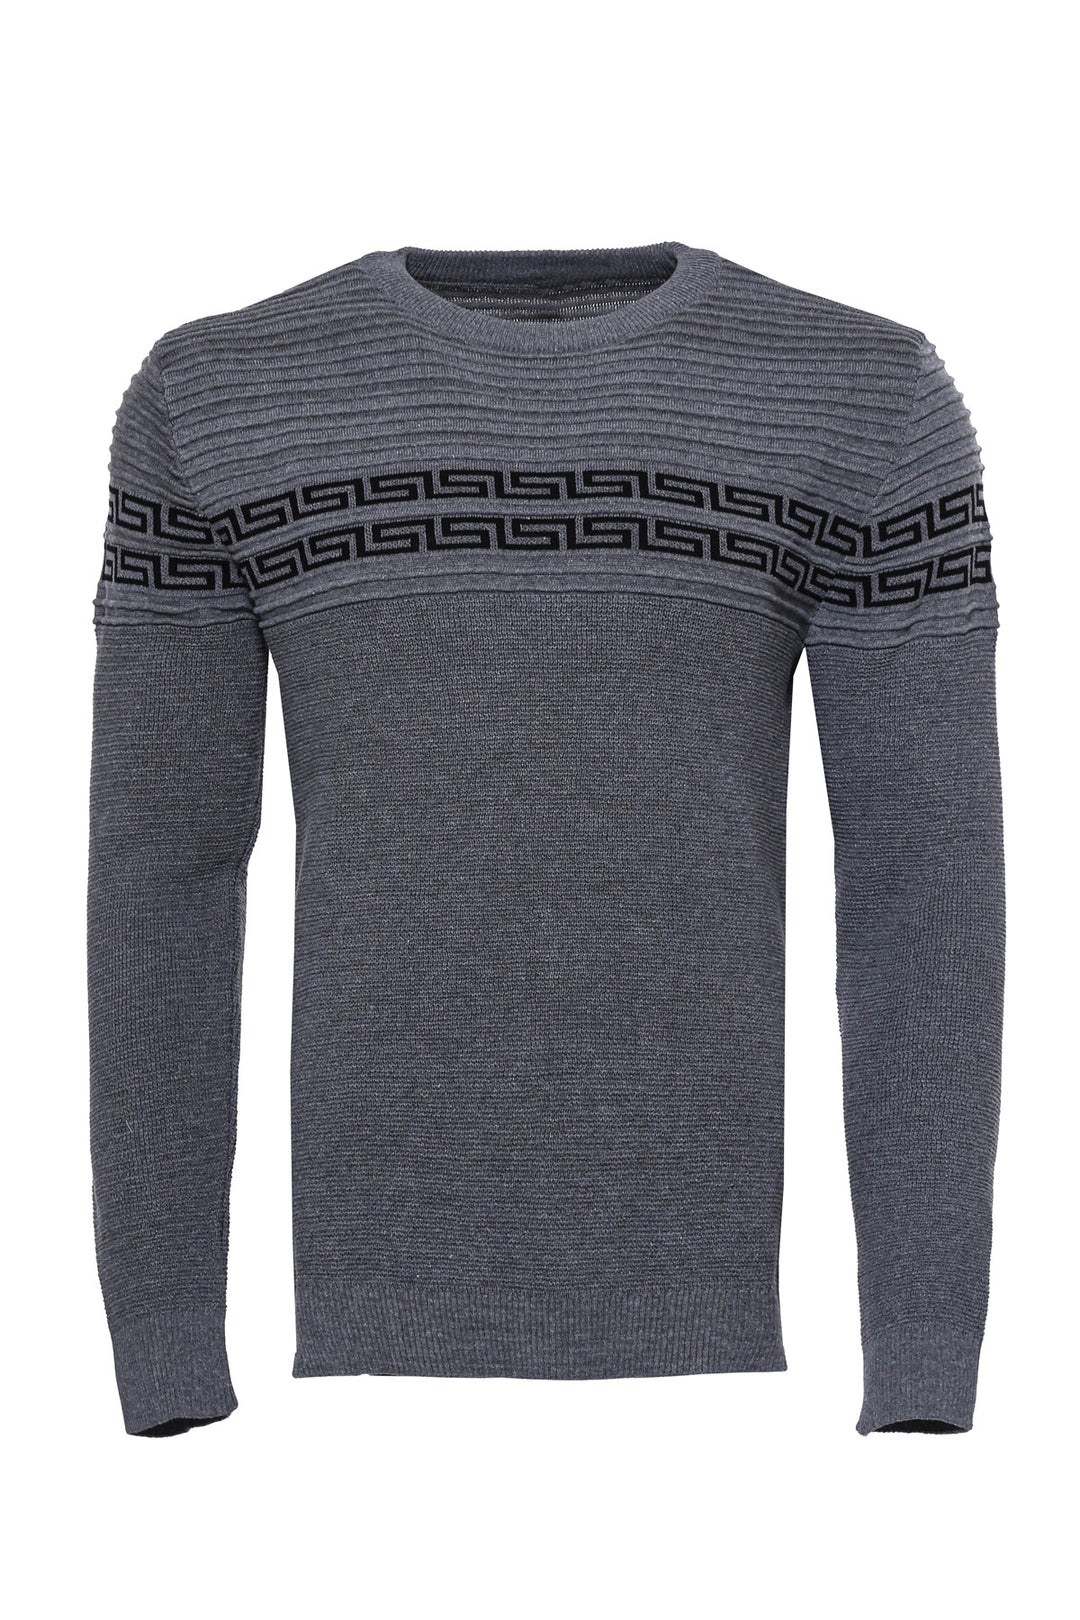 Crew Neck Knitwear Chest Patterned Over Grey - Wessi